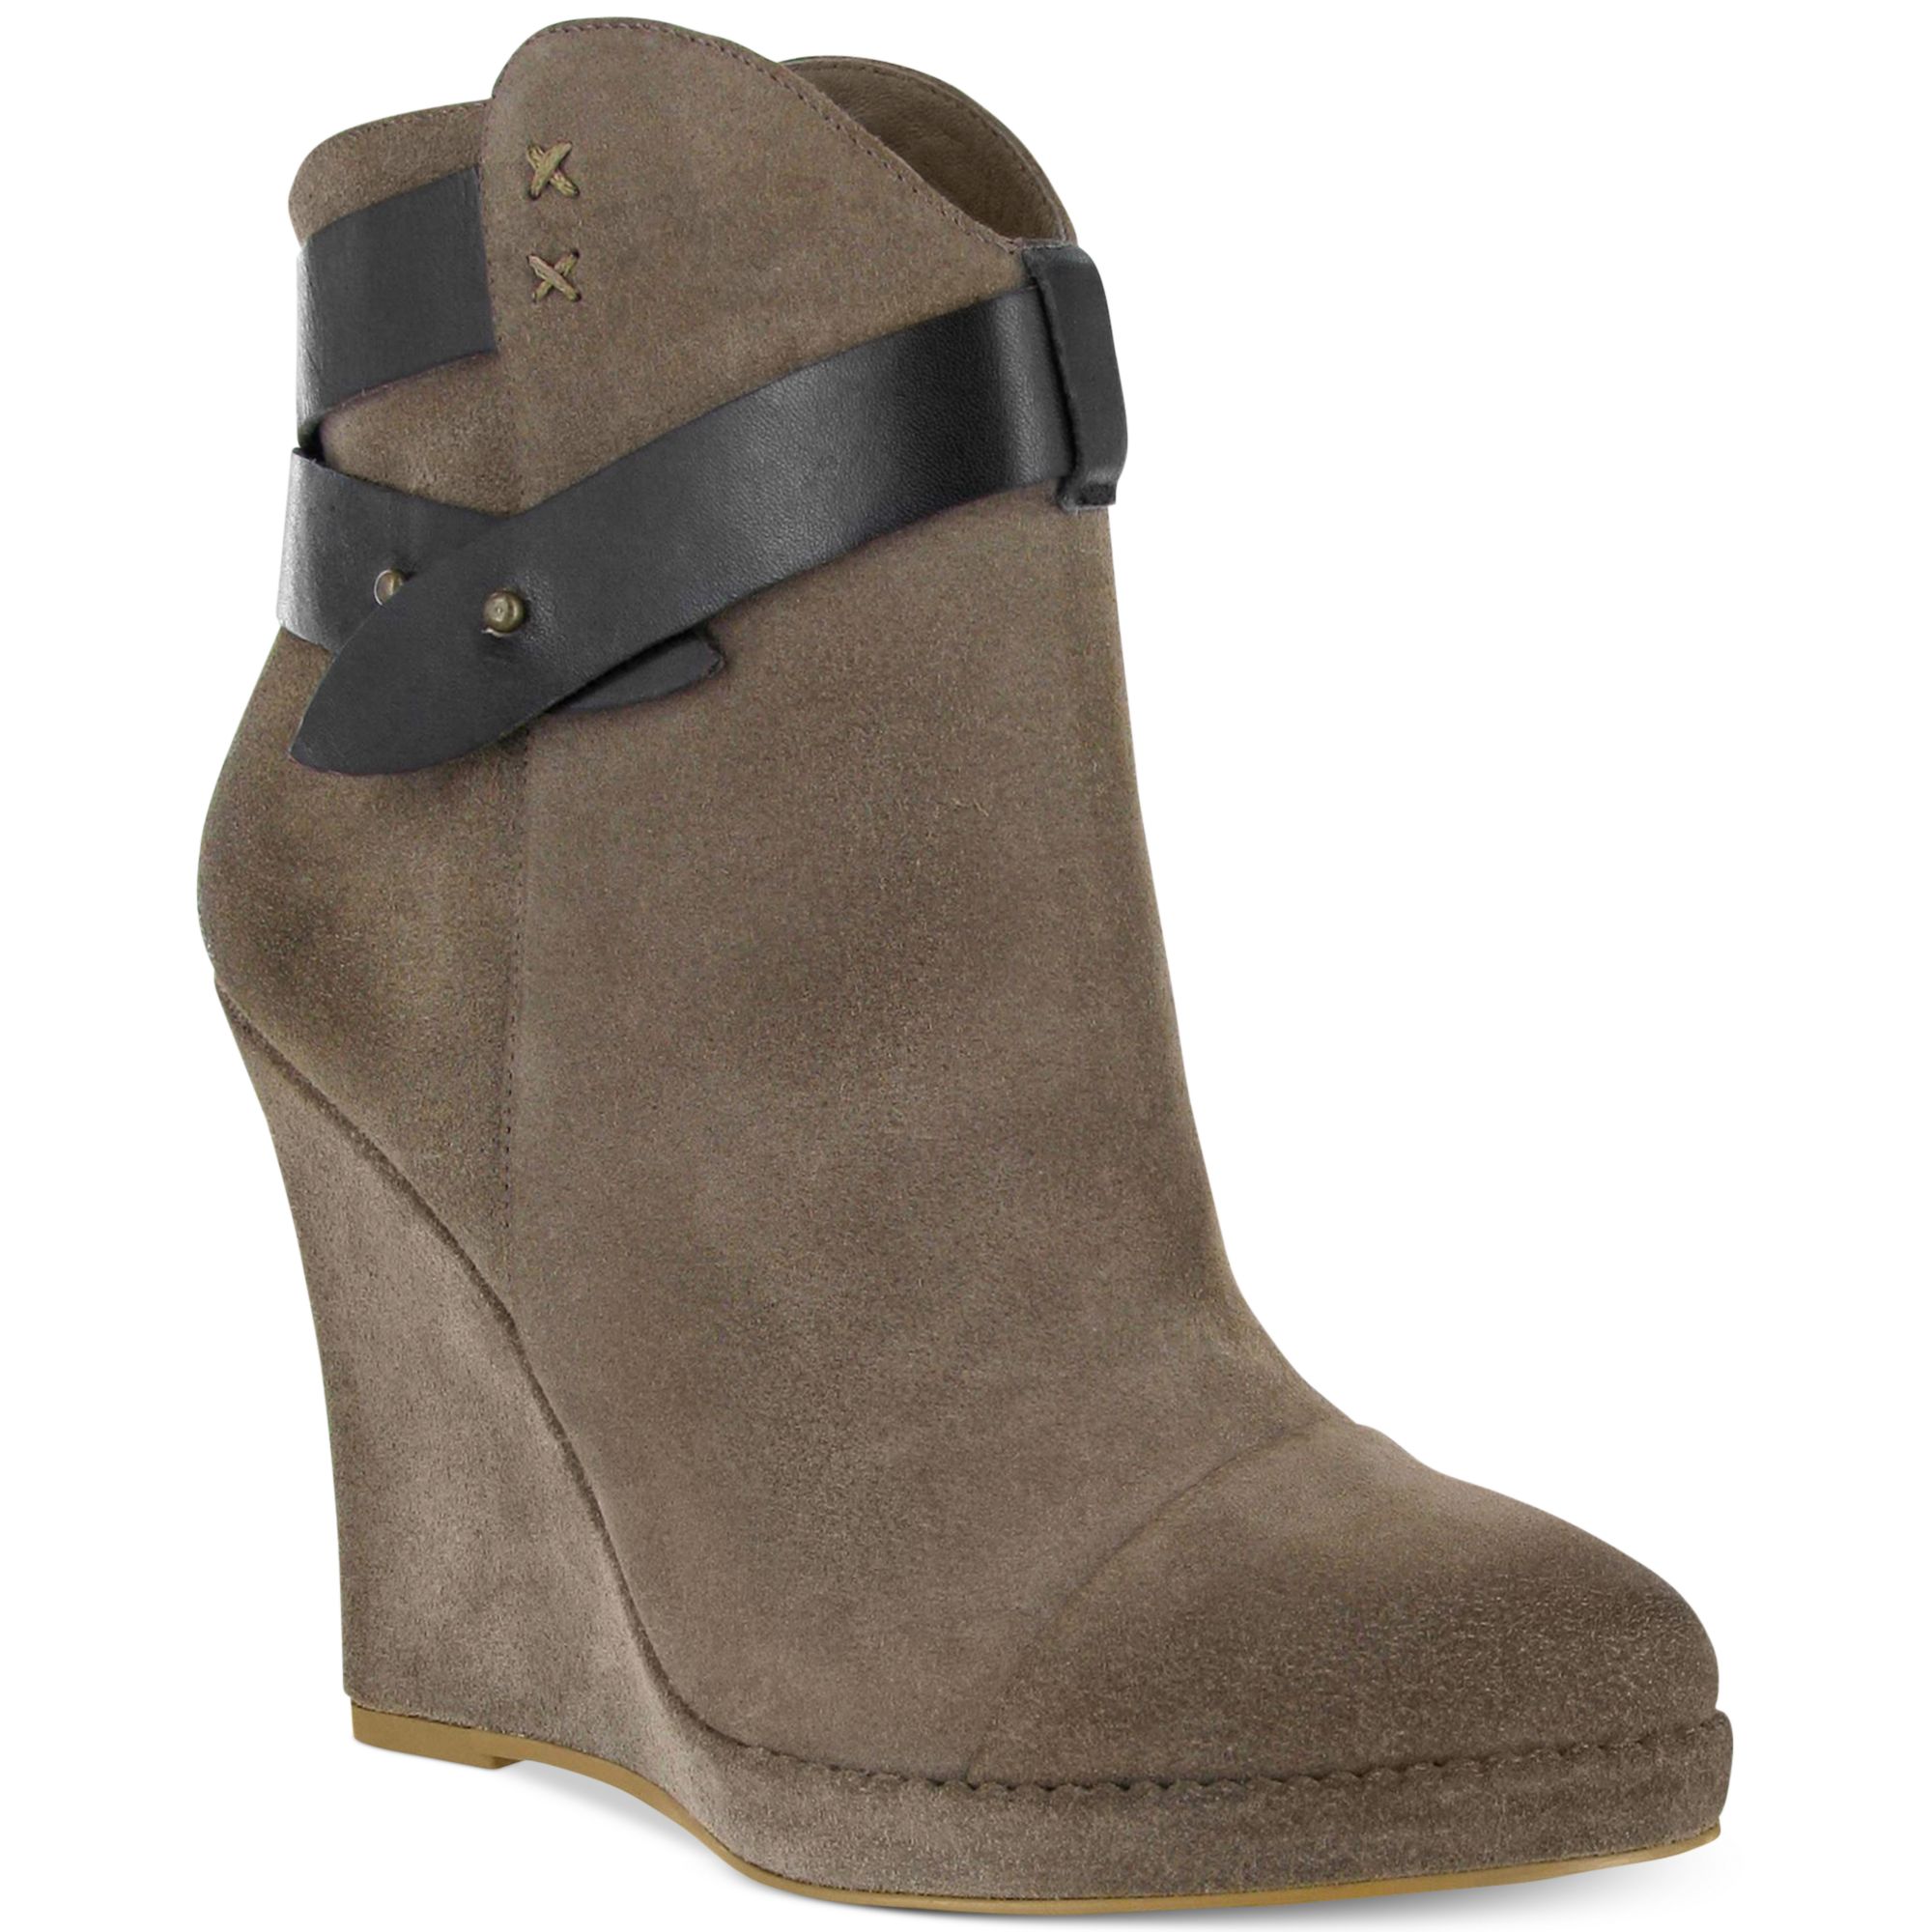 Lyst - Mia Colonyy Wedge Booties in Brown